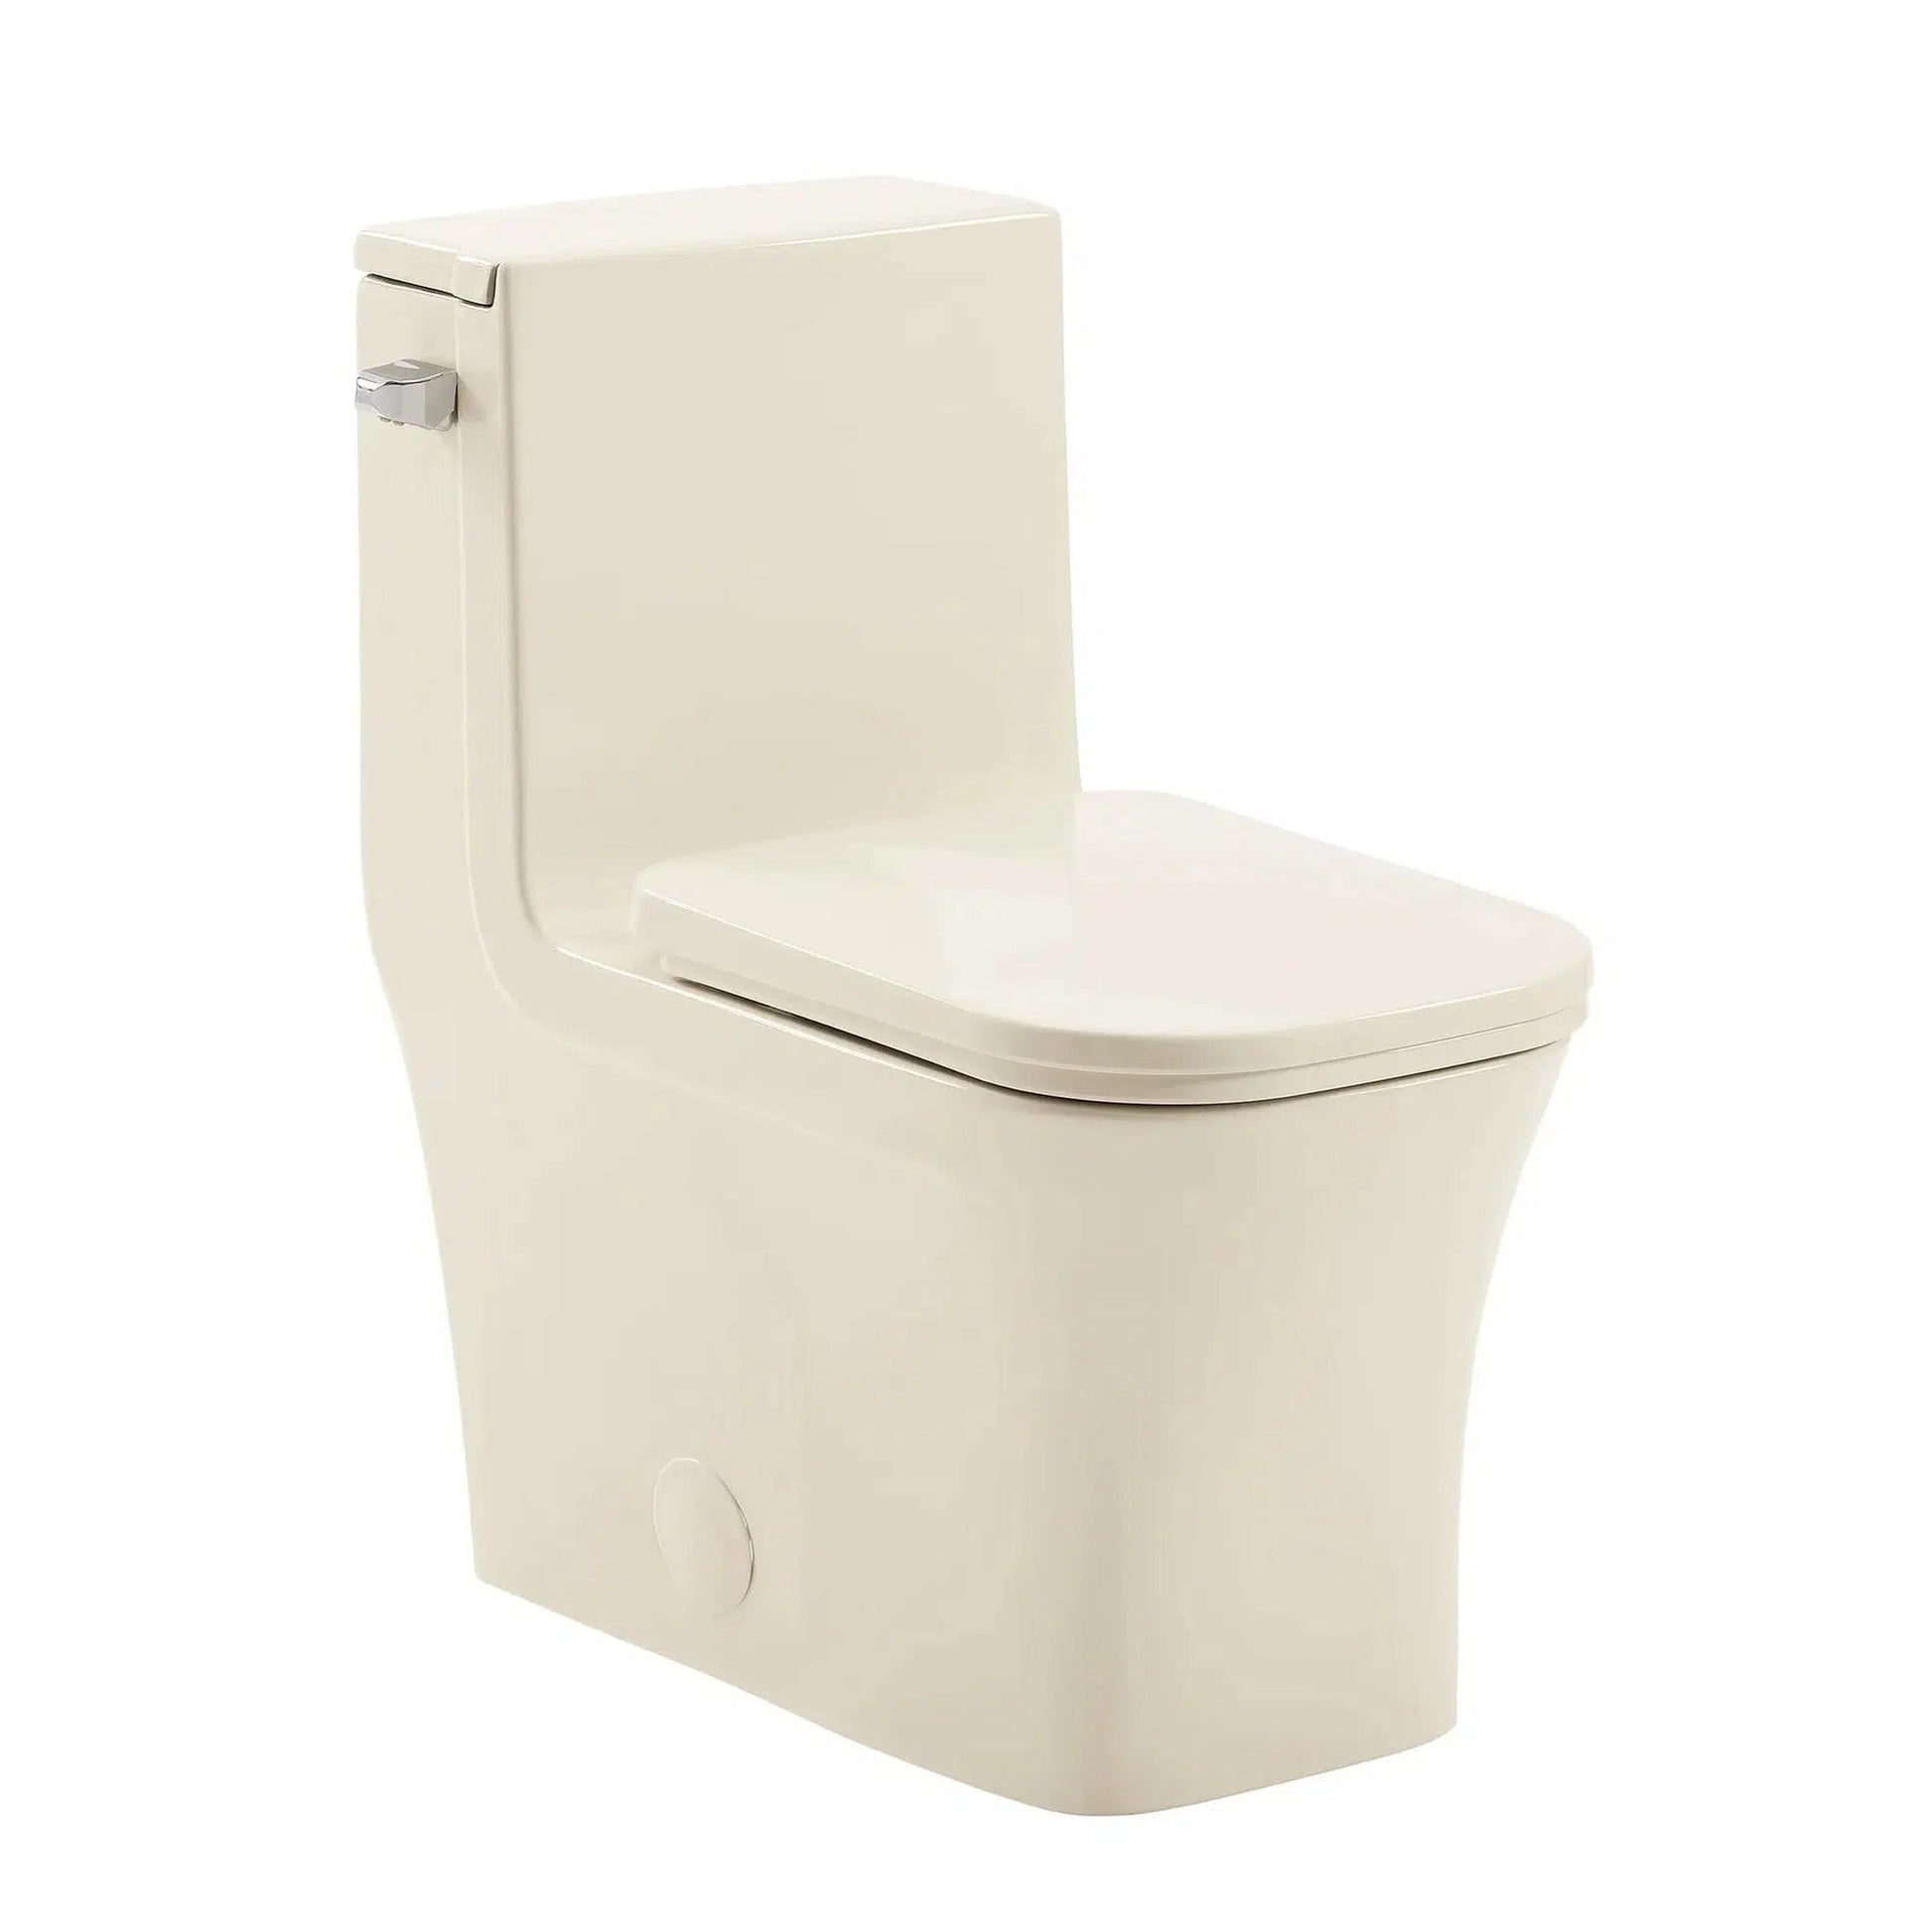 Swiss Madison Concorde 14" x 29" Bisque One-Piece Elongated Square Floor Mounted Toilet With 1.28 GPF Side Flush Function